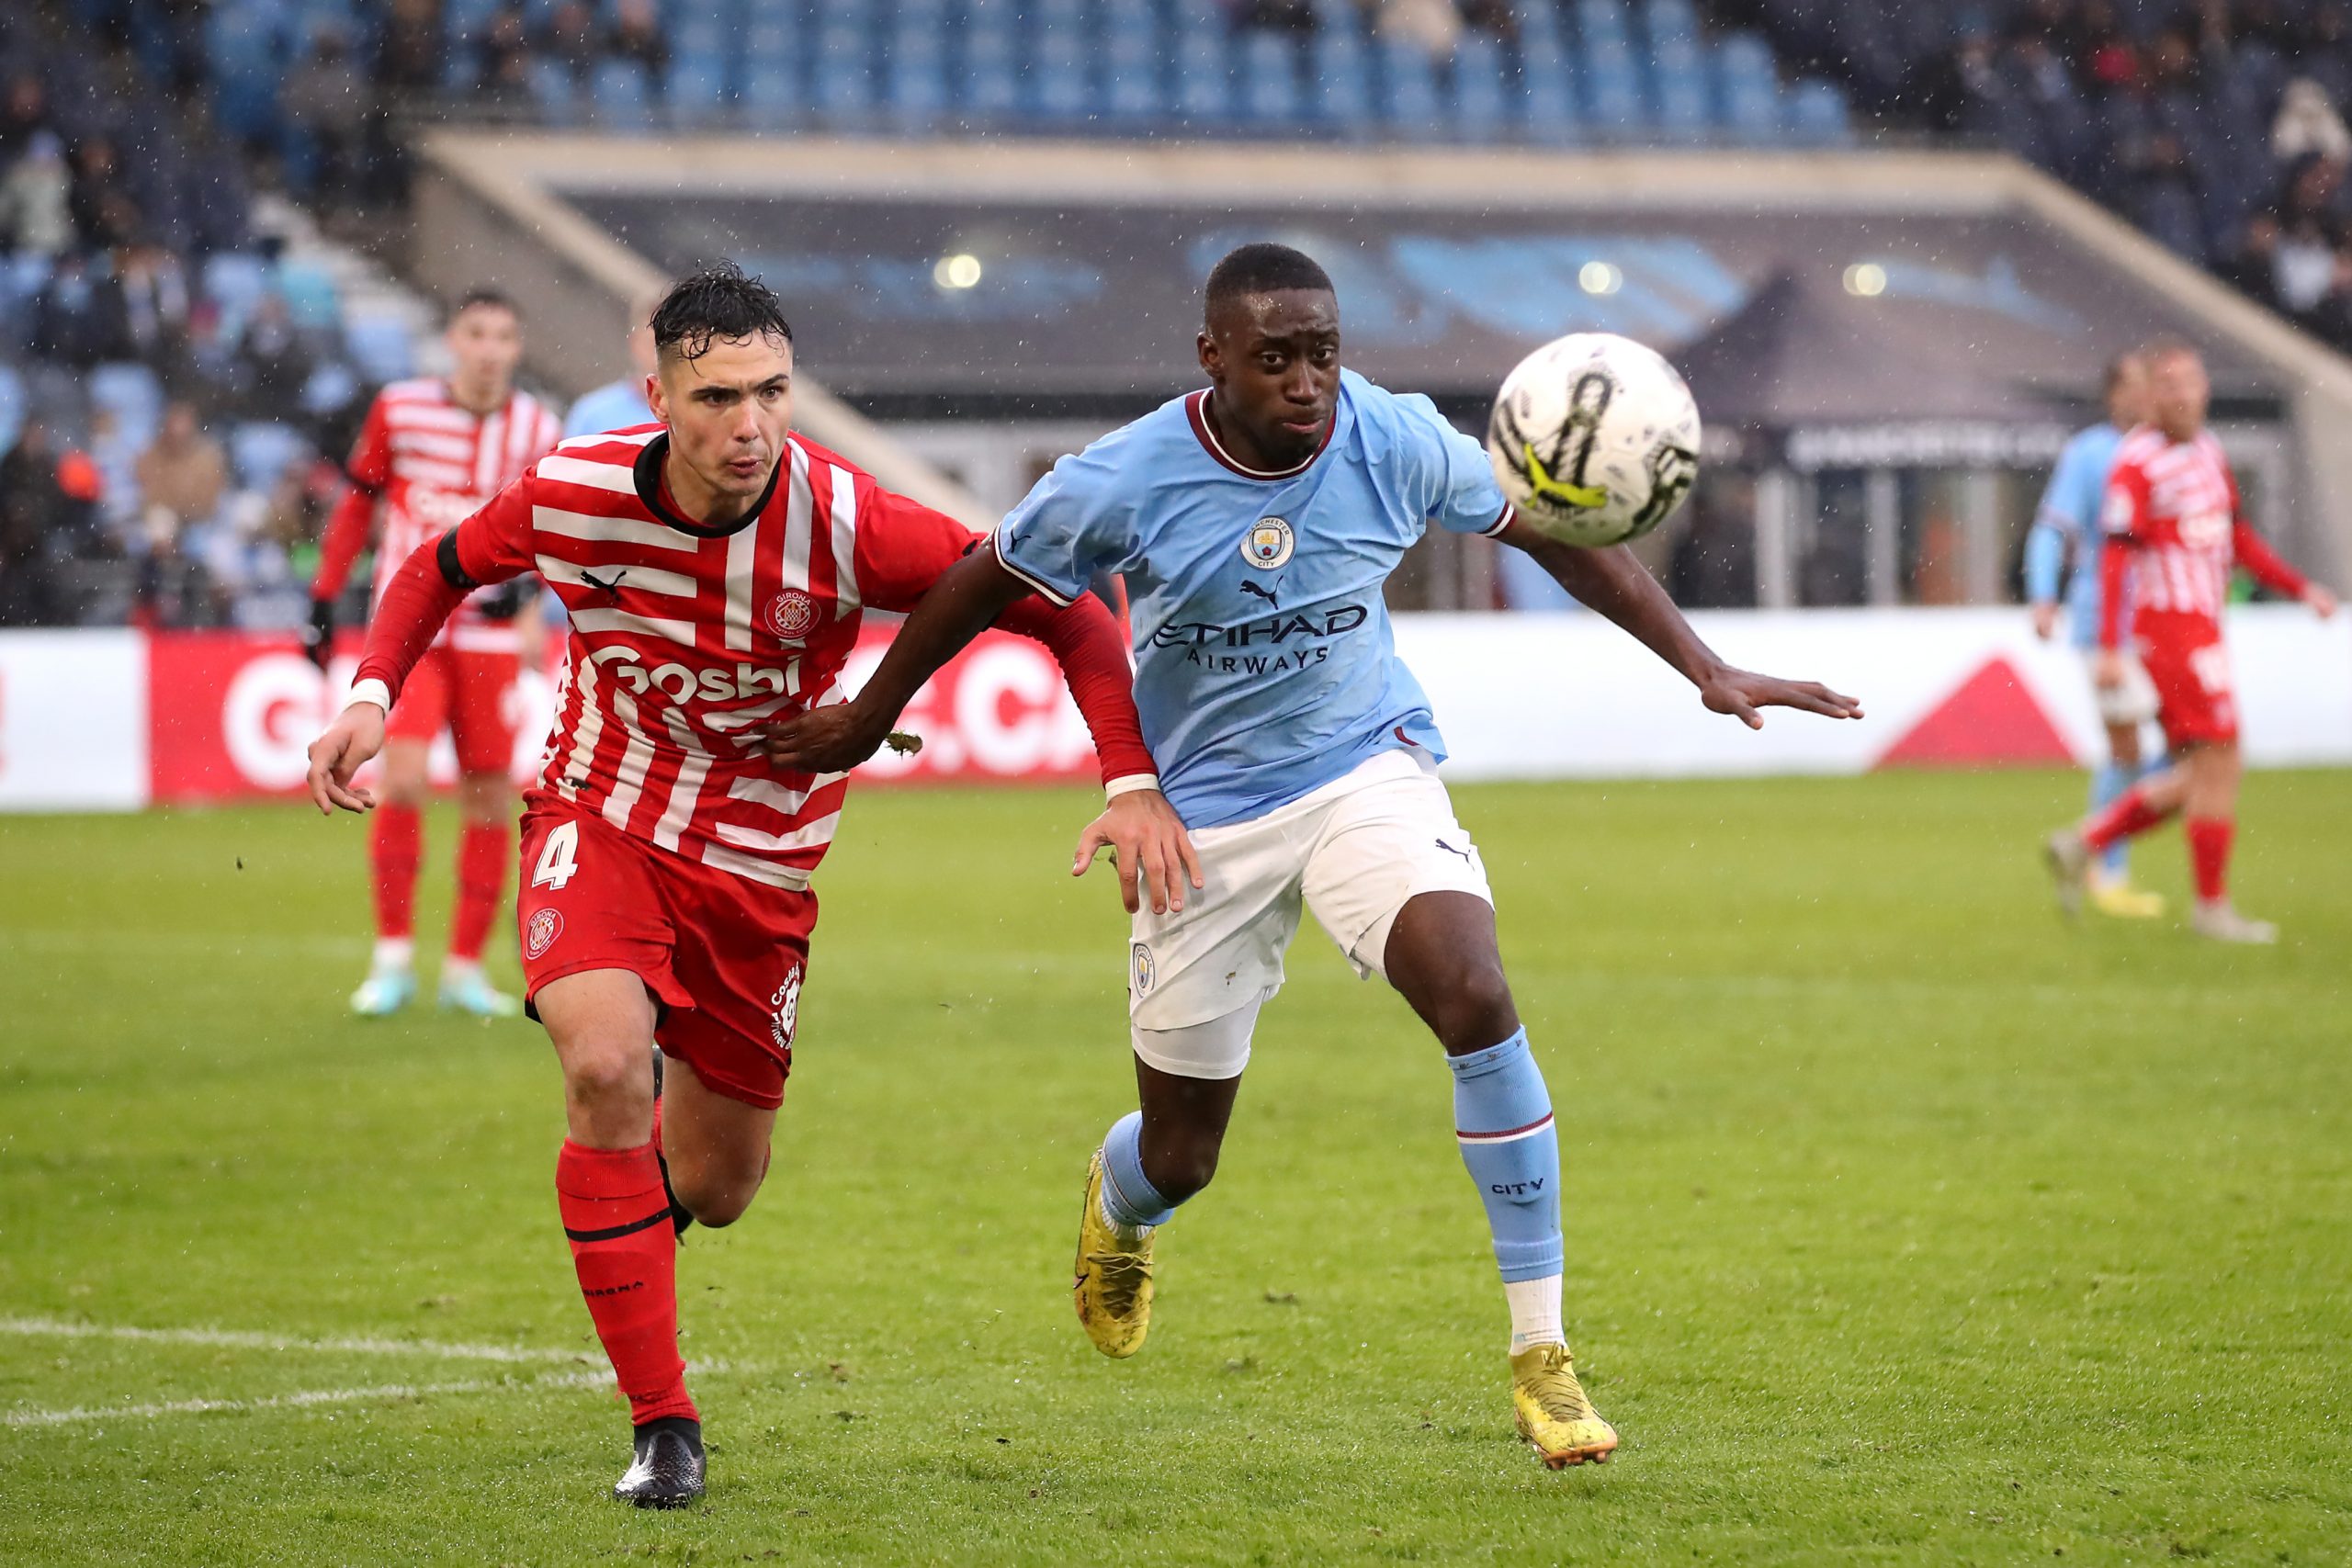 MANCHESTER, ENGLAND - DECEMBER 17: Carlos Borges of Manchester City in action during the friendly match between Manchester City and Girona at Manchester City Academy Stadium on December 17, 2022 in Manchester, England. (Photo by Jan Kruger/Getty Images)